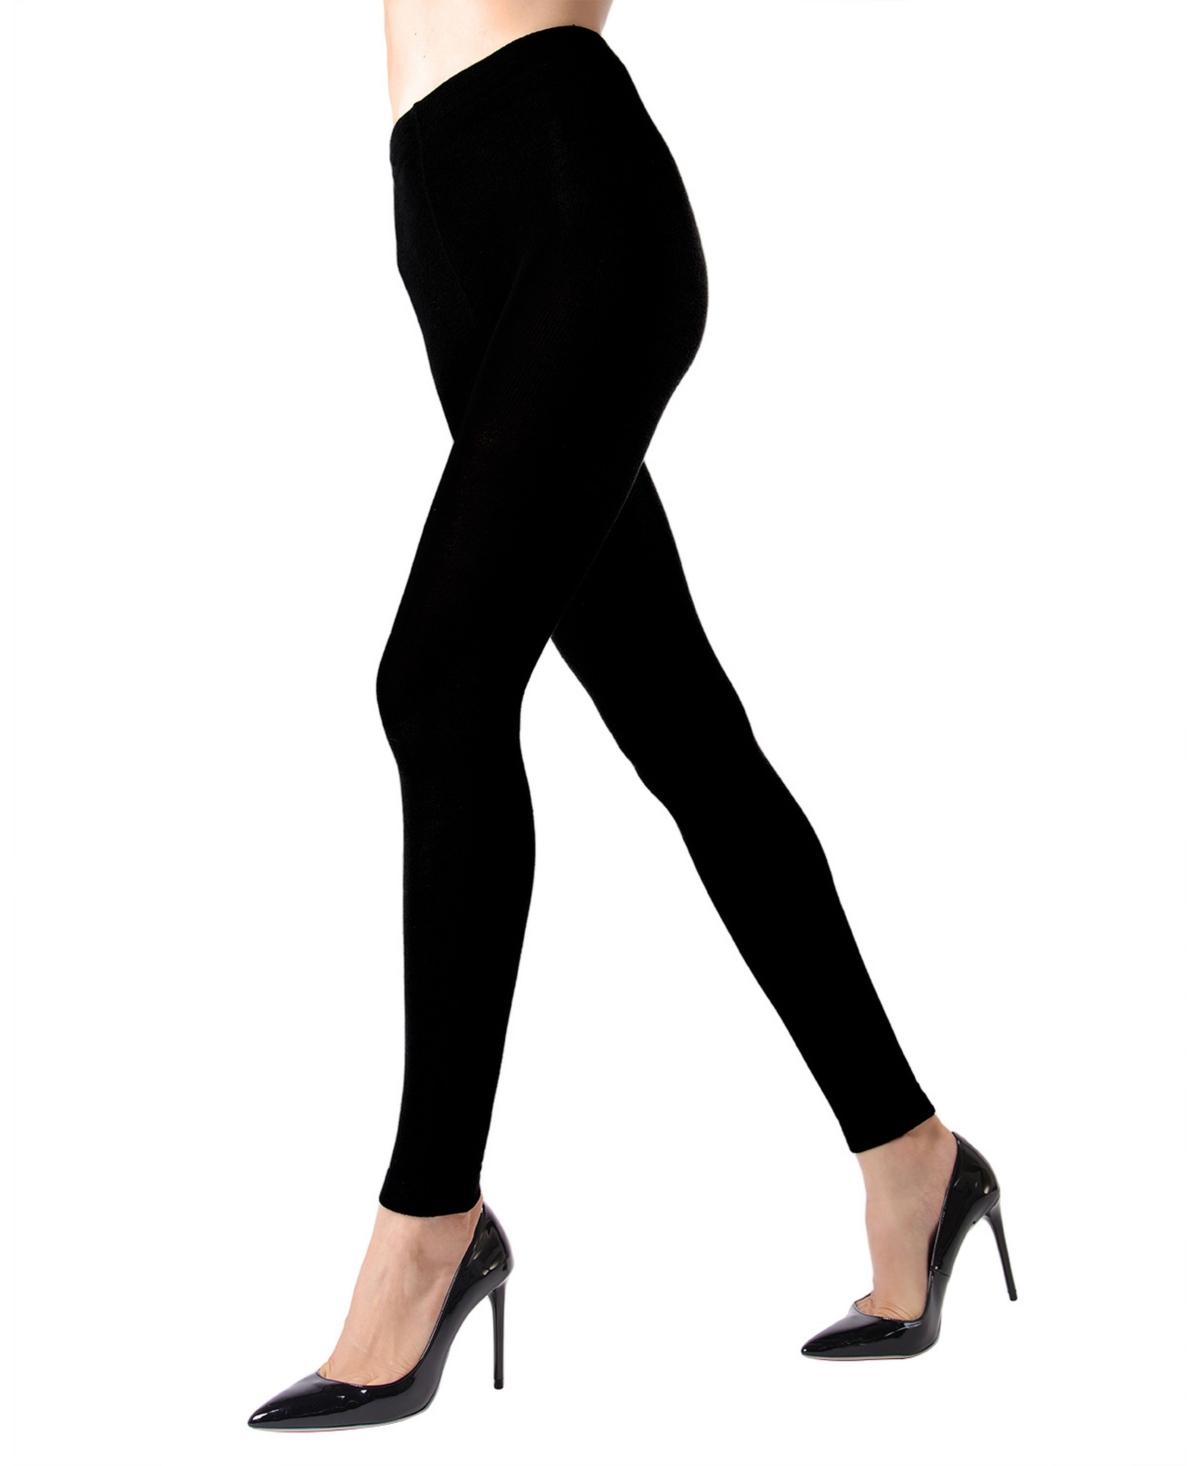 Women's Blackout Thermal Heat Opaque Tights - Black